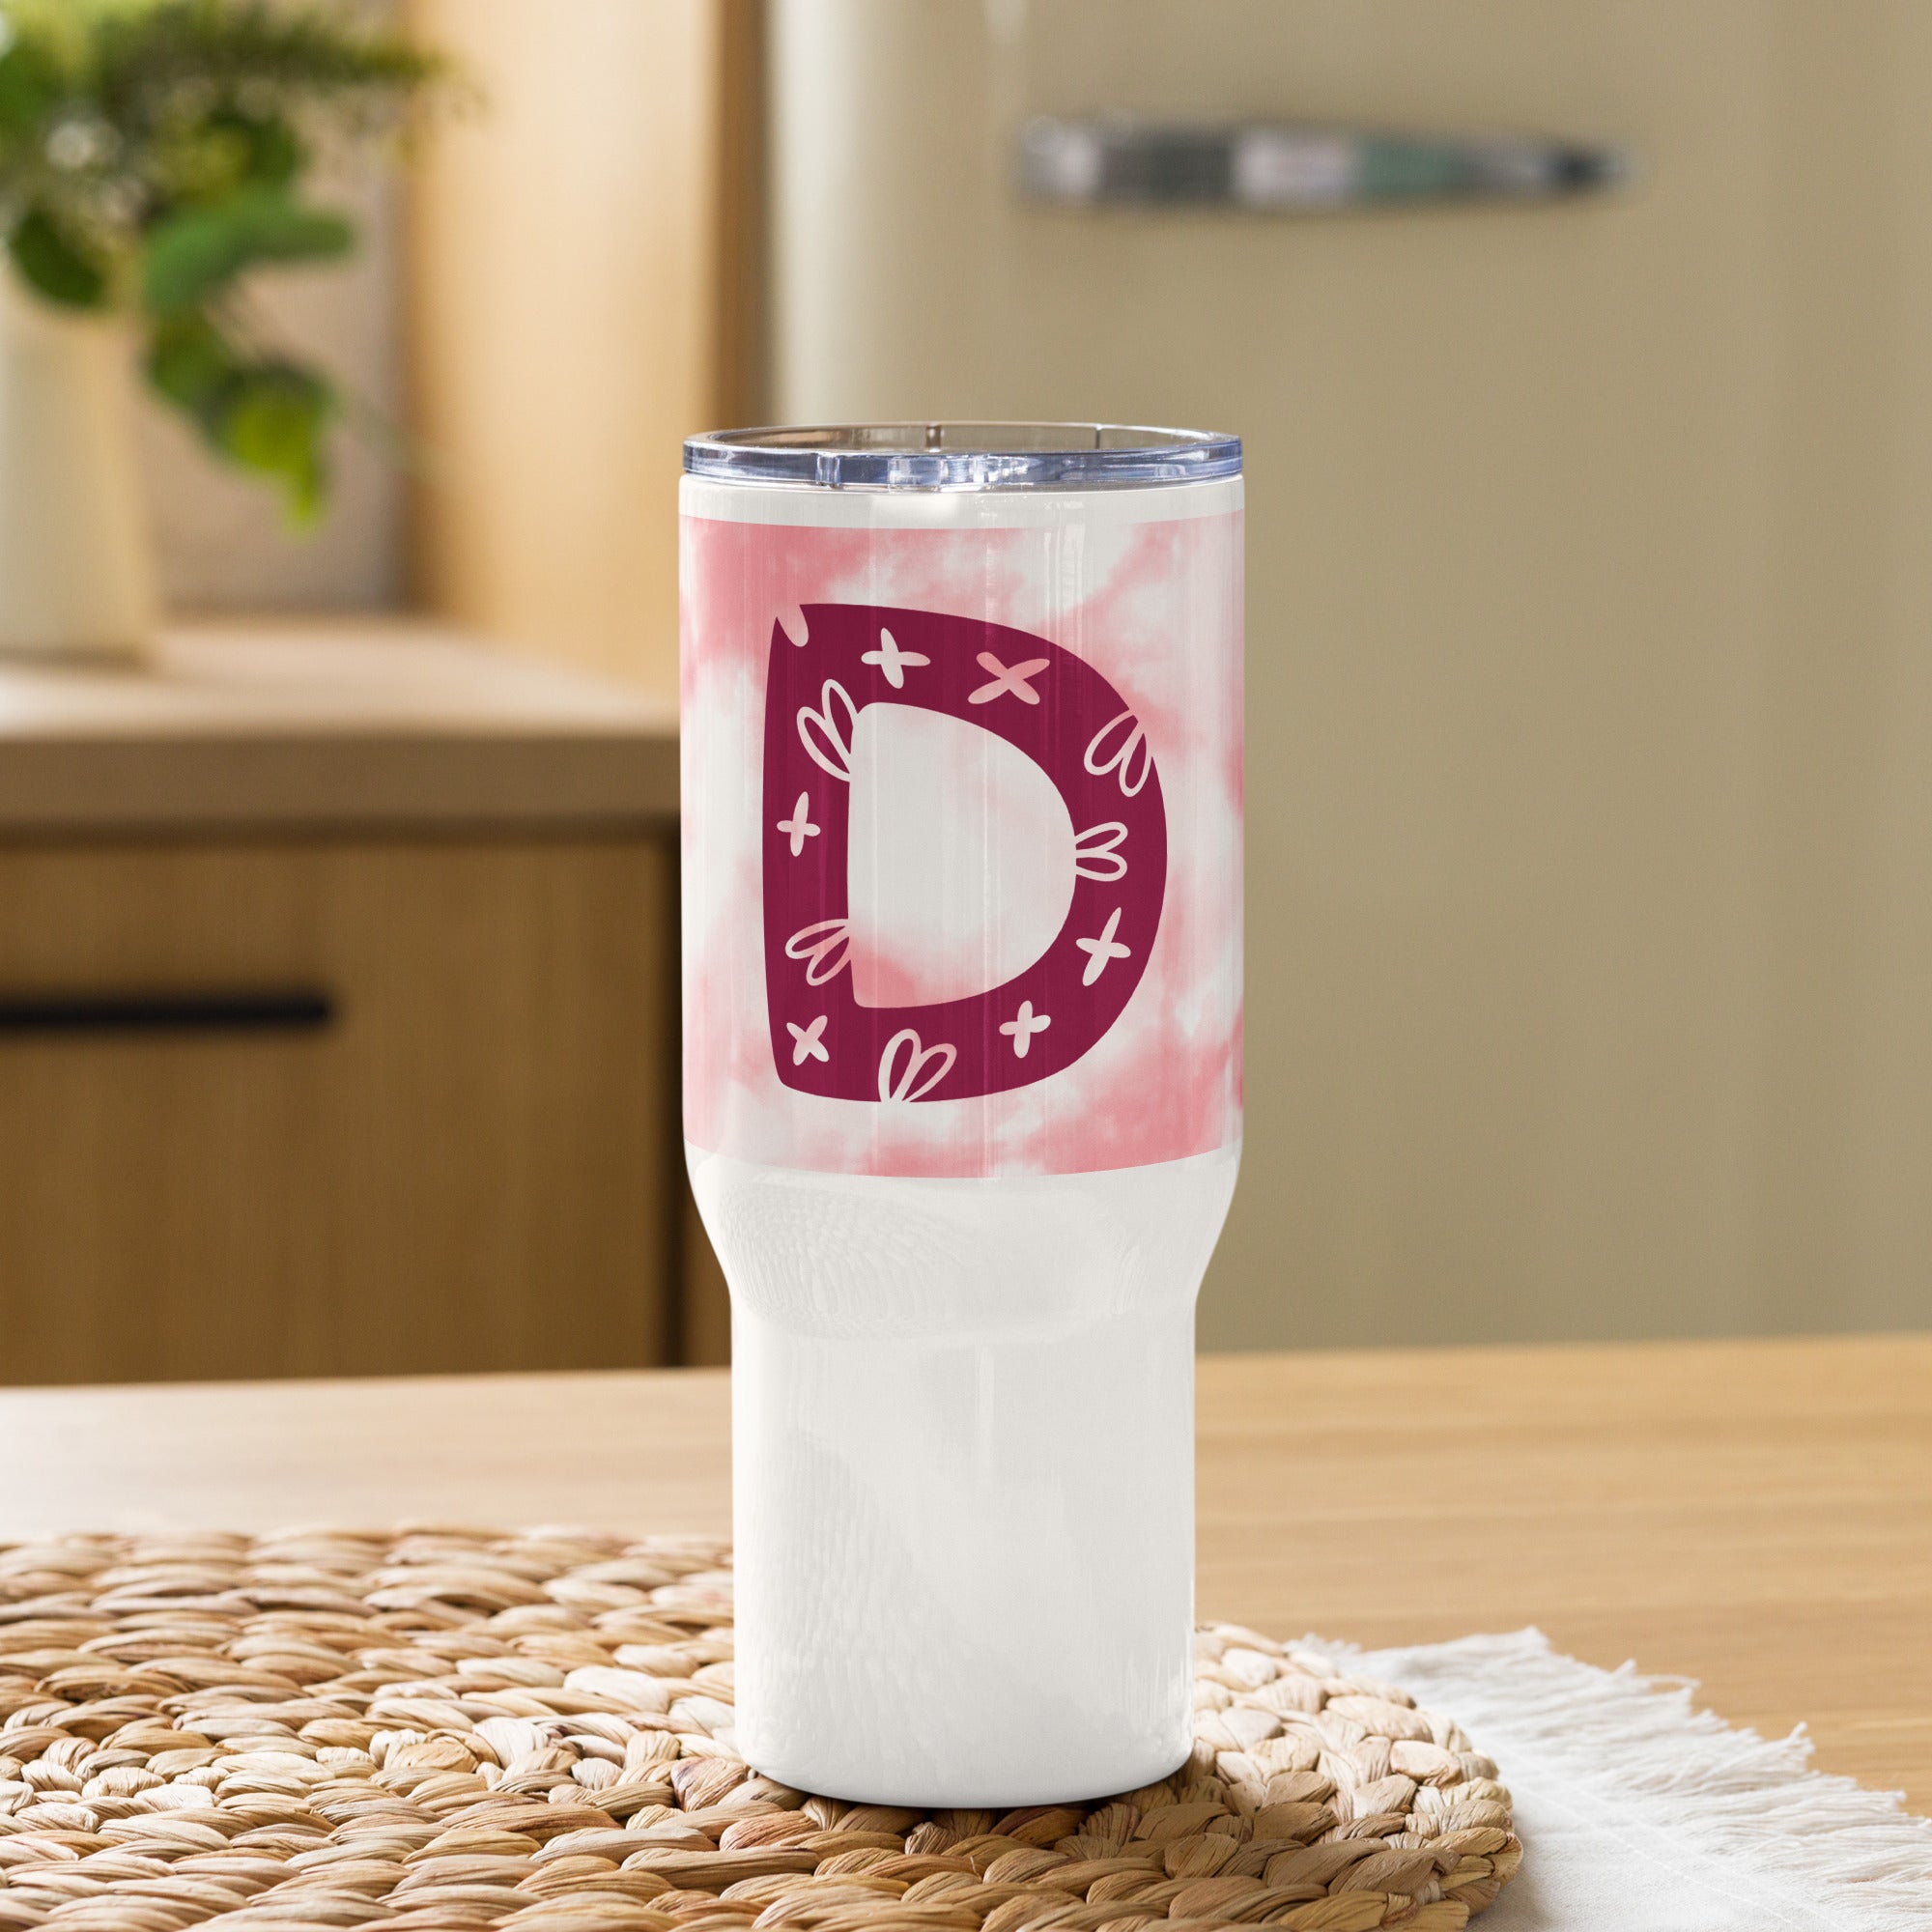 Travel mug designed with your Initial